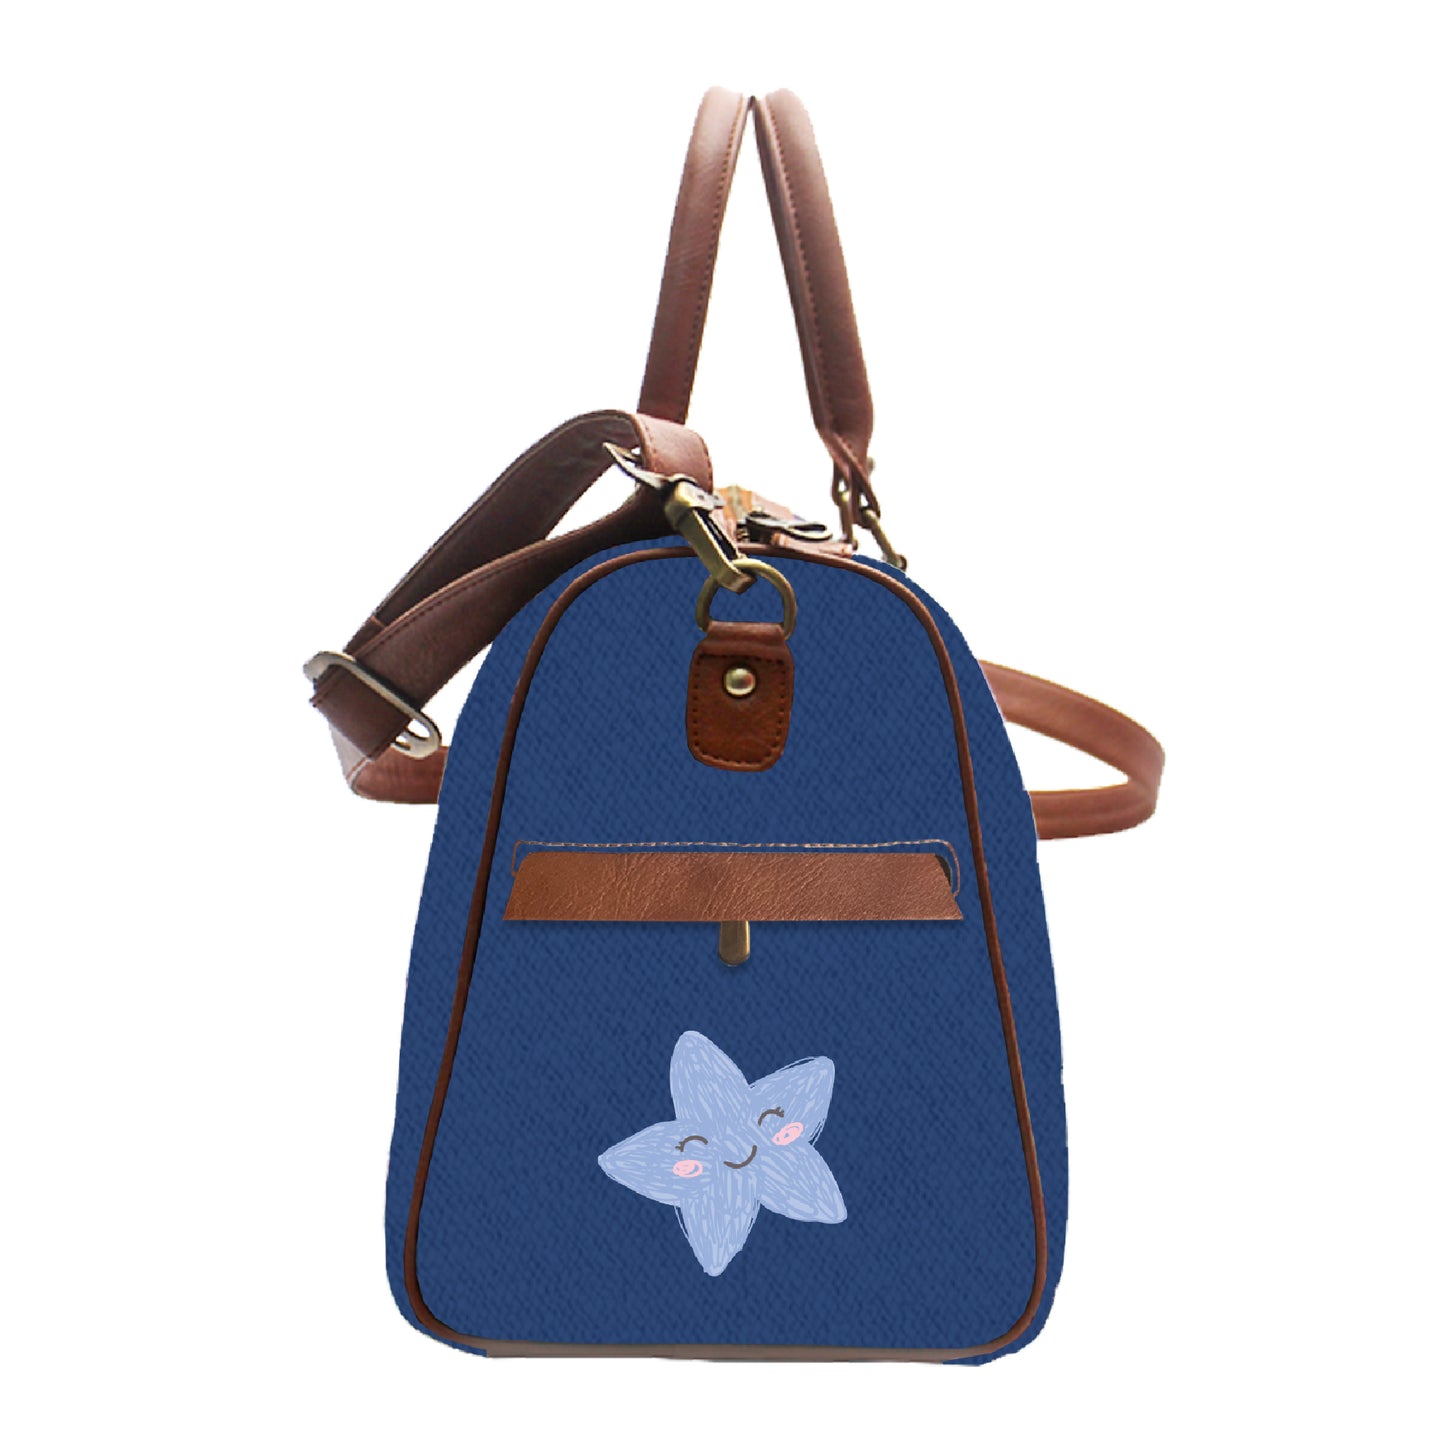 Urbanhand urban hand Canvas and PU Leather diaper bag personalised Moon Star Blue Brown stripe